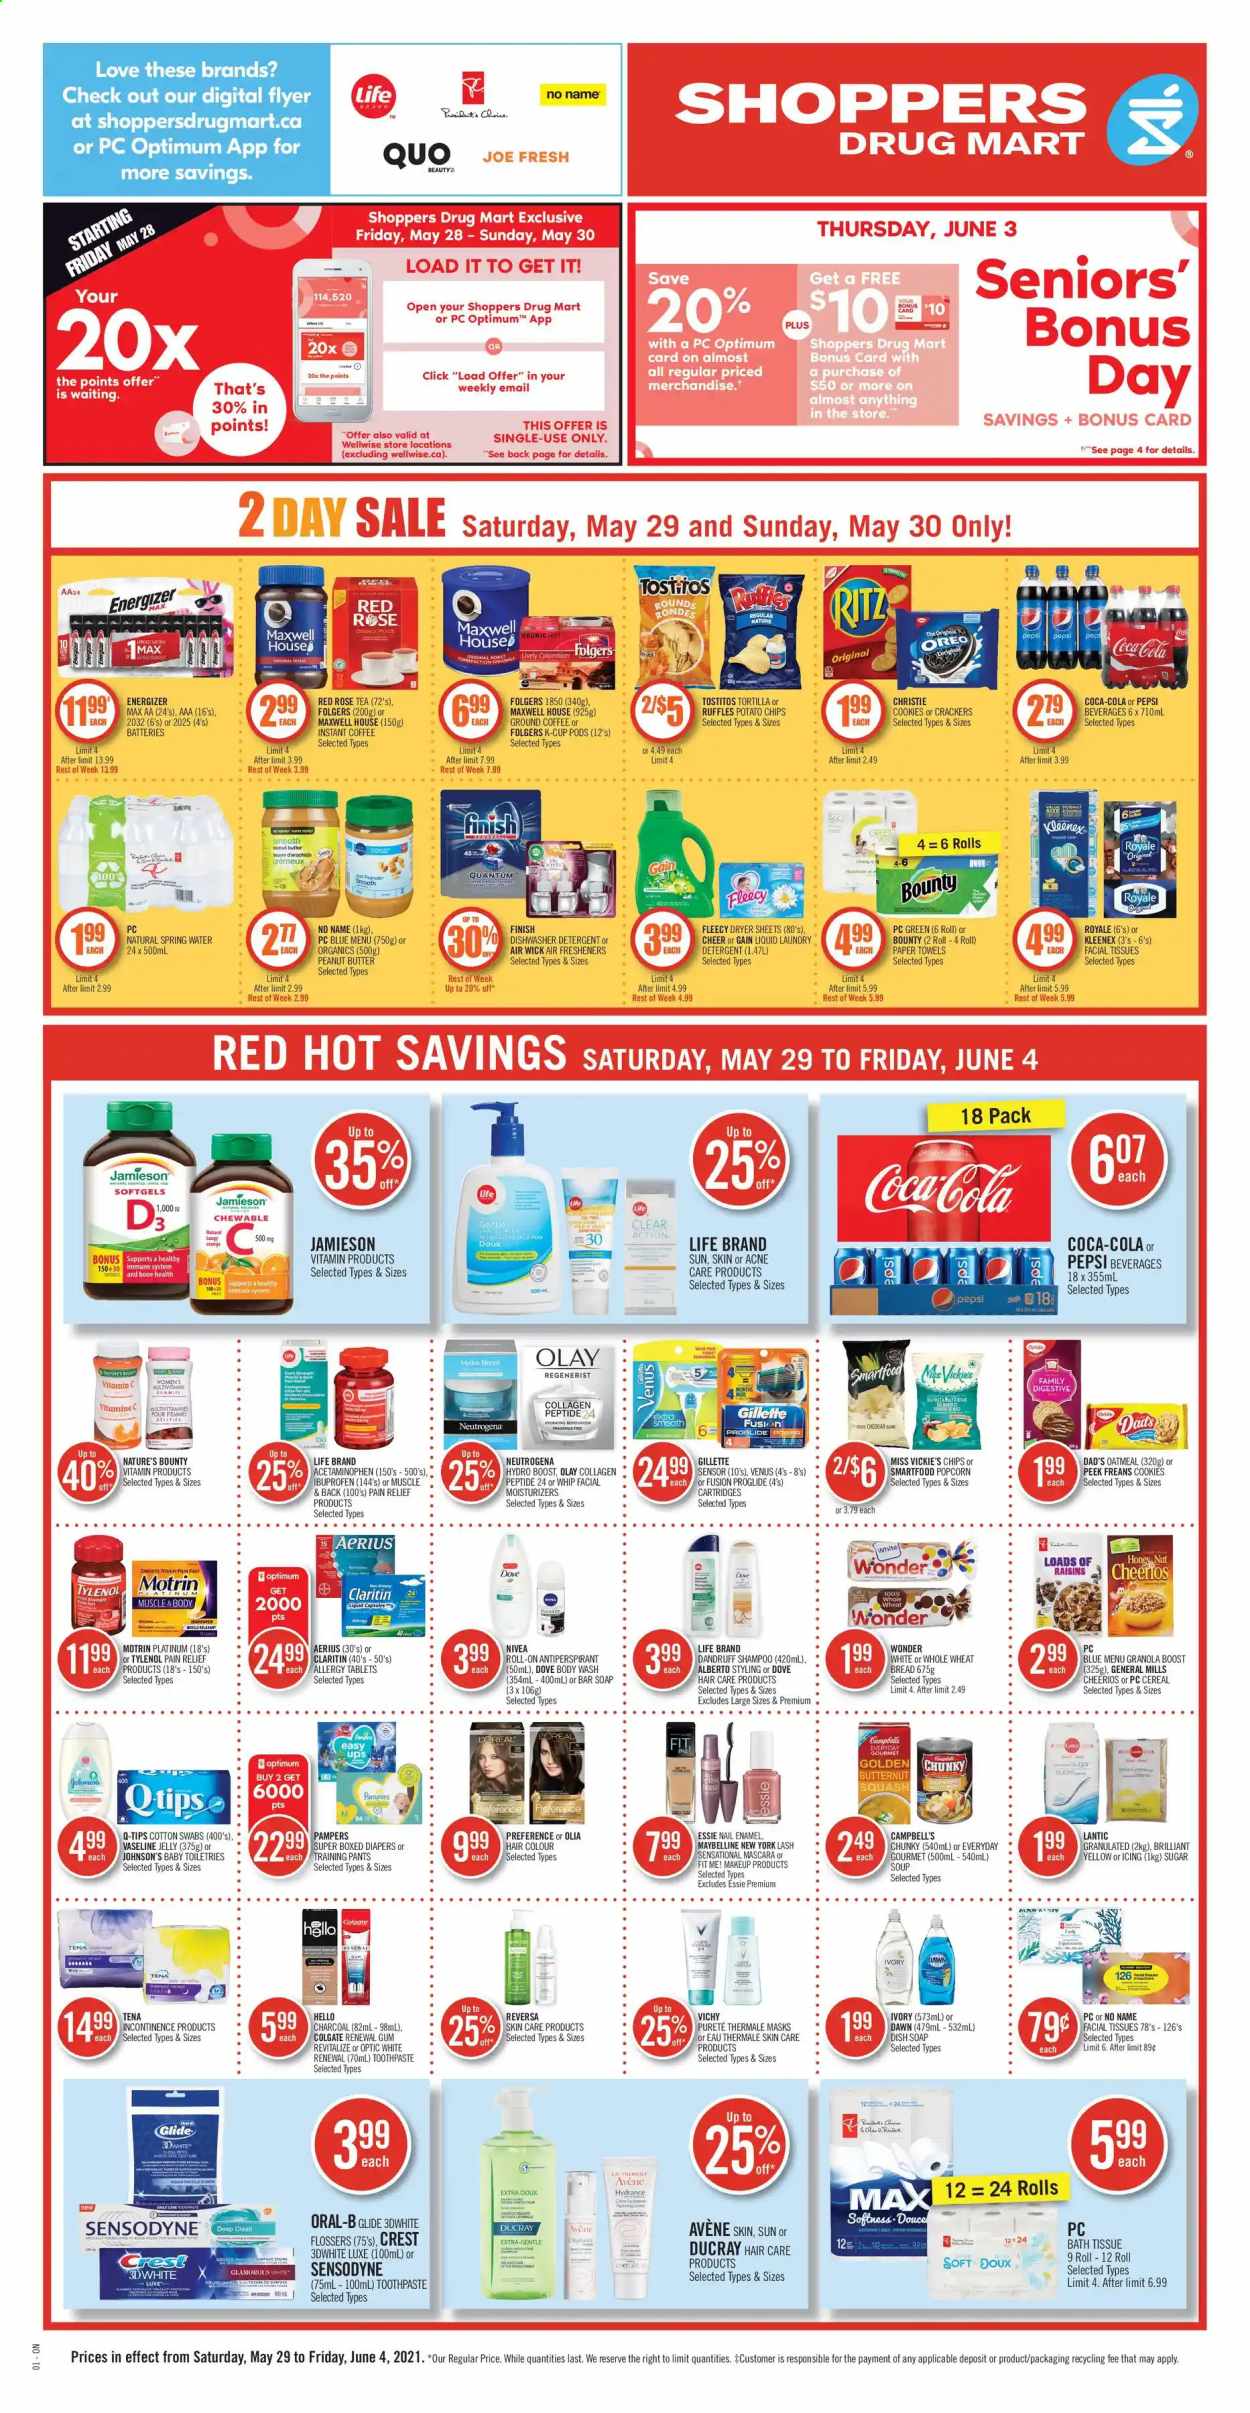 thumbnail - Shoppers Drug Mart Flyer - May 29, 2021 - June 04, 2021 - Sales products - cookies, jelly, crackers, RITZ, tortillas, potato chips, Smartfood, popcorn, Ruffles, Tostitos, sugar, oatmeal, soup, cereals, Cheerios, Ace, Campbell's, peanut butter, dried fruit, Coca-Cola, Pepsi, spring water, Boost, Maxwell House, instant coffee, Folgers, ground coffee, coffee capsules, K-Cups, pants, nappies, Johnson's, baby pants, bath tissue, Kleenex, kitchen towels, paper towels, Gain, laundry detergent, dryer sheets, body wash, Vichy, Vaseline, soap bar, soap, toothpaste, Crest, facial tissues, L’Oréal, moisturizer, Olay, hair color, anti-perspirant, fragrance, roll-on, Venus, nail enamel, makeup, pain relief, multivitamin, Nature's Bounty, Tylenol, vitamin c, Ibuprofen, vitamin D3, Motrin, Oreo, Gillette, granola, mascara, Maybelline, Neutrogena, raisins, Pampers, Nivea, Oral-B, chips, Sensodyne. Page 1.